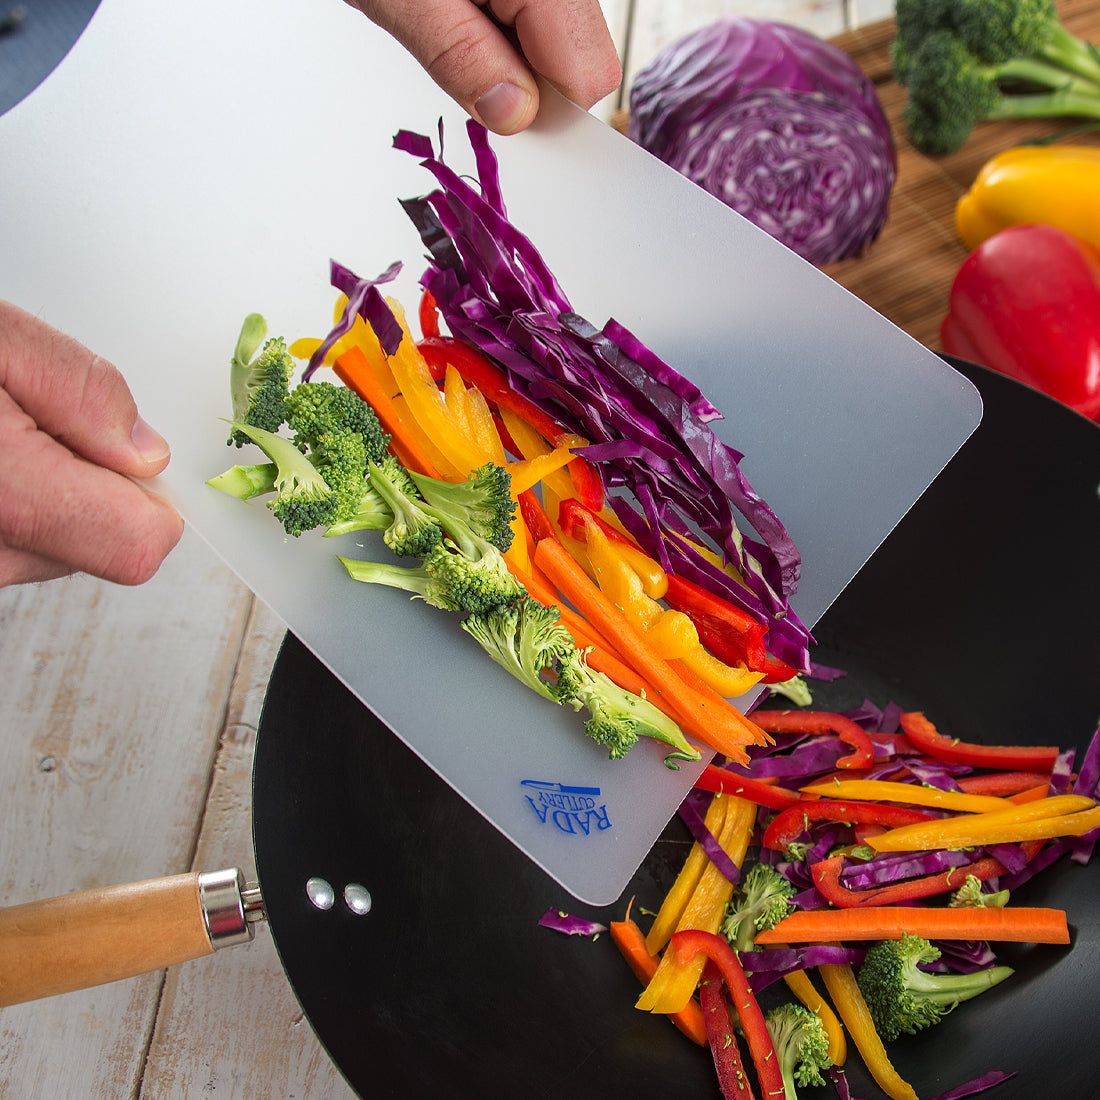 A Flexible Cutting Board being used to funnel chopped vegetables into a wok